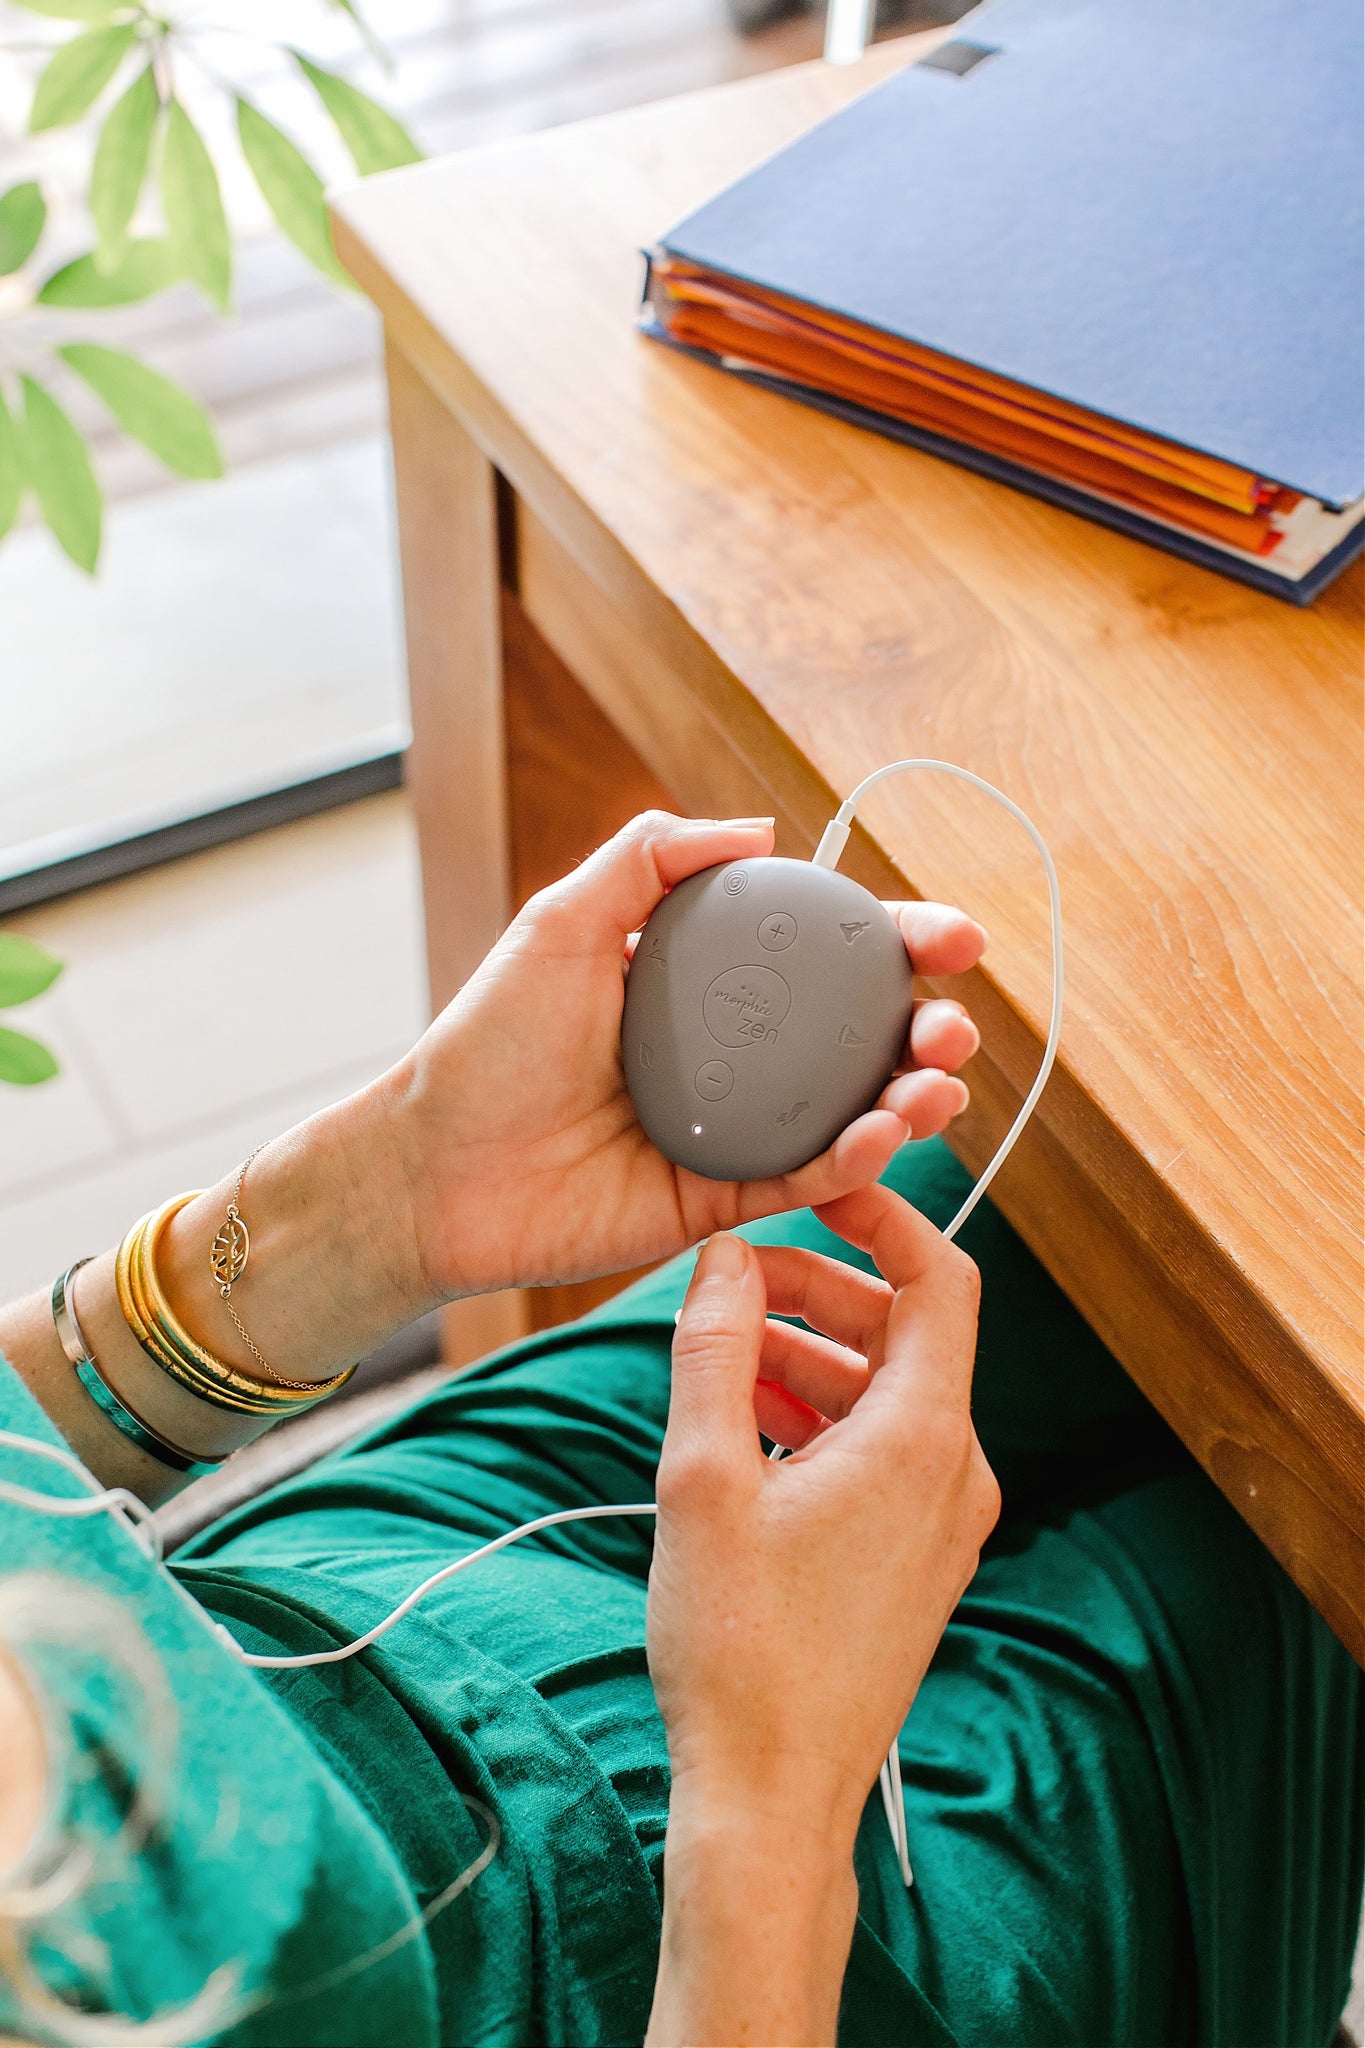 Morphee shrinks its relaxation gadget to compact Zen – Pickr